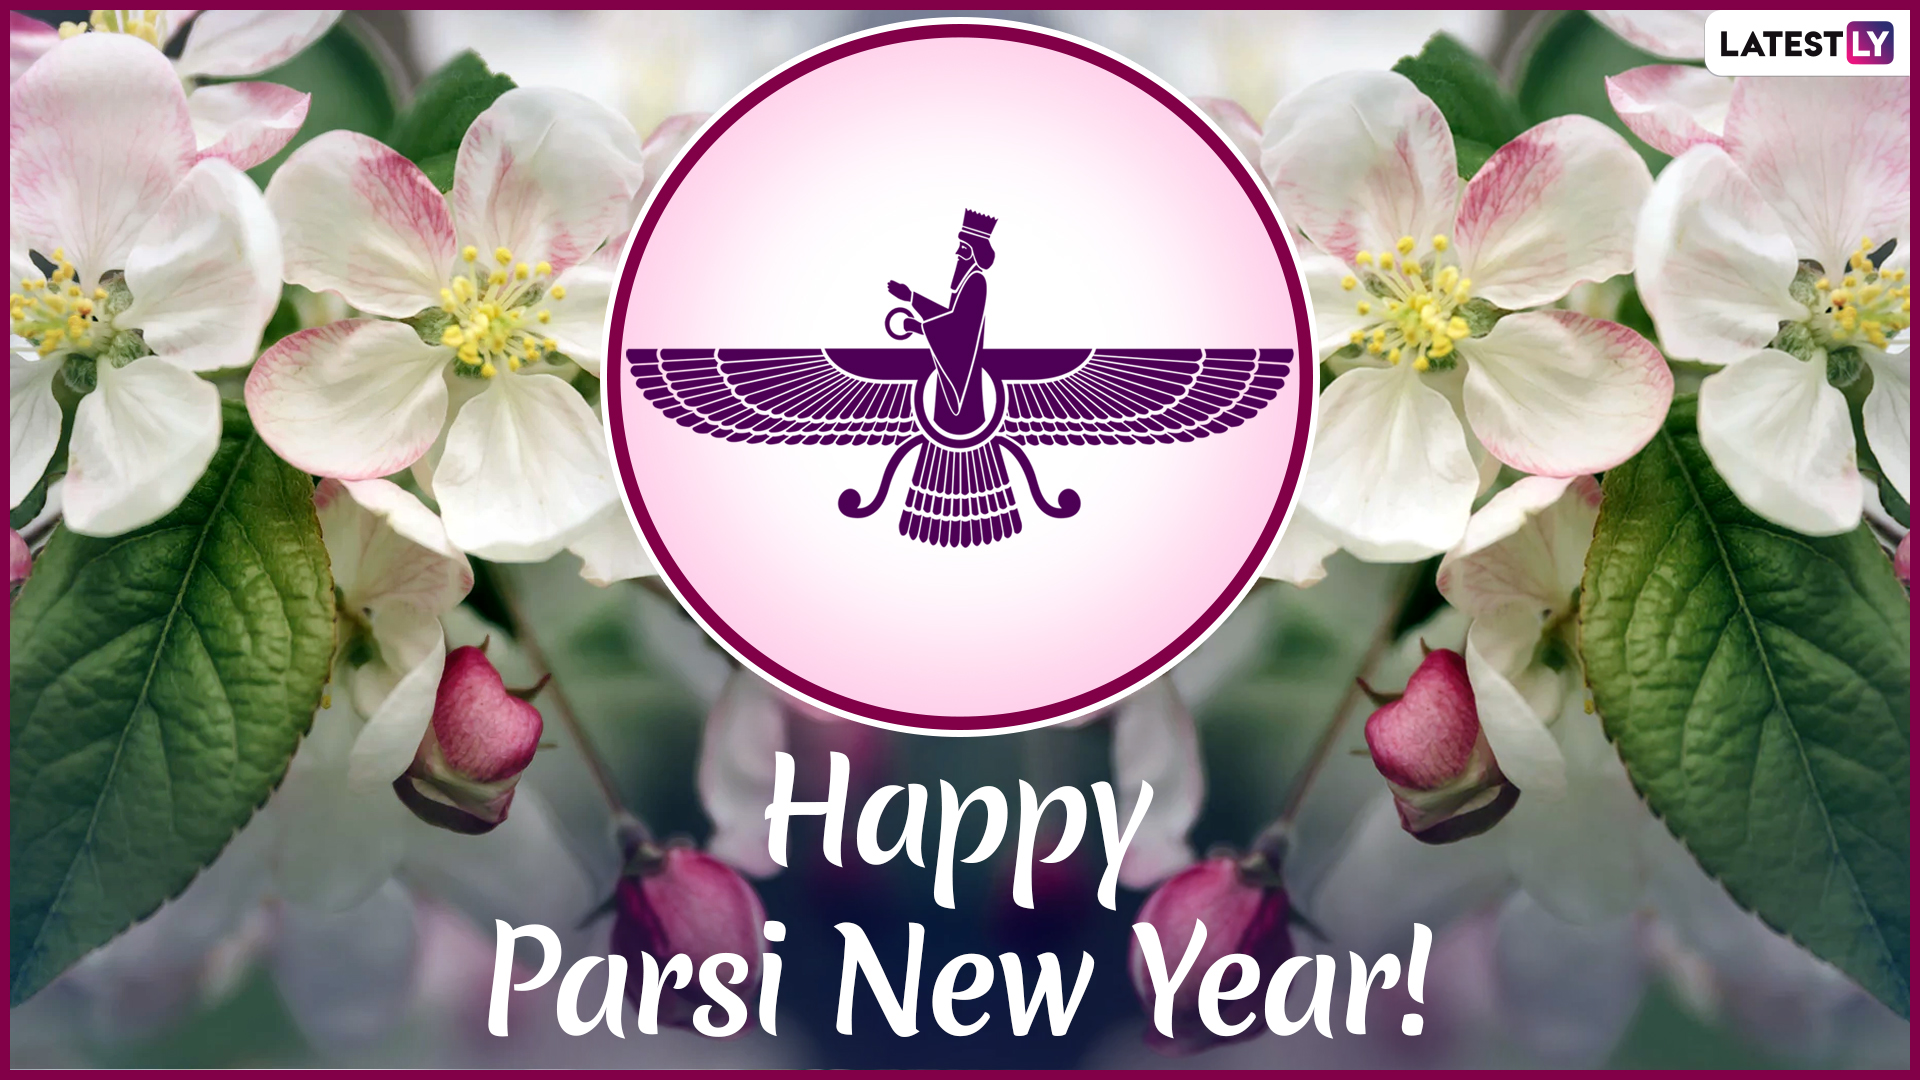 Parsi New Year Images and HD Wallpapers For Free Download Online Wish